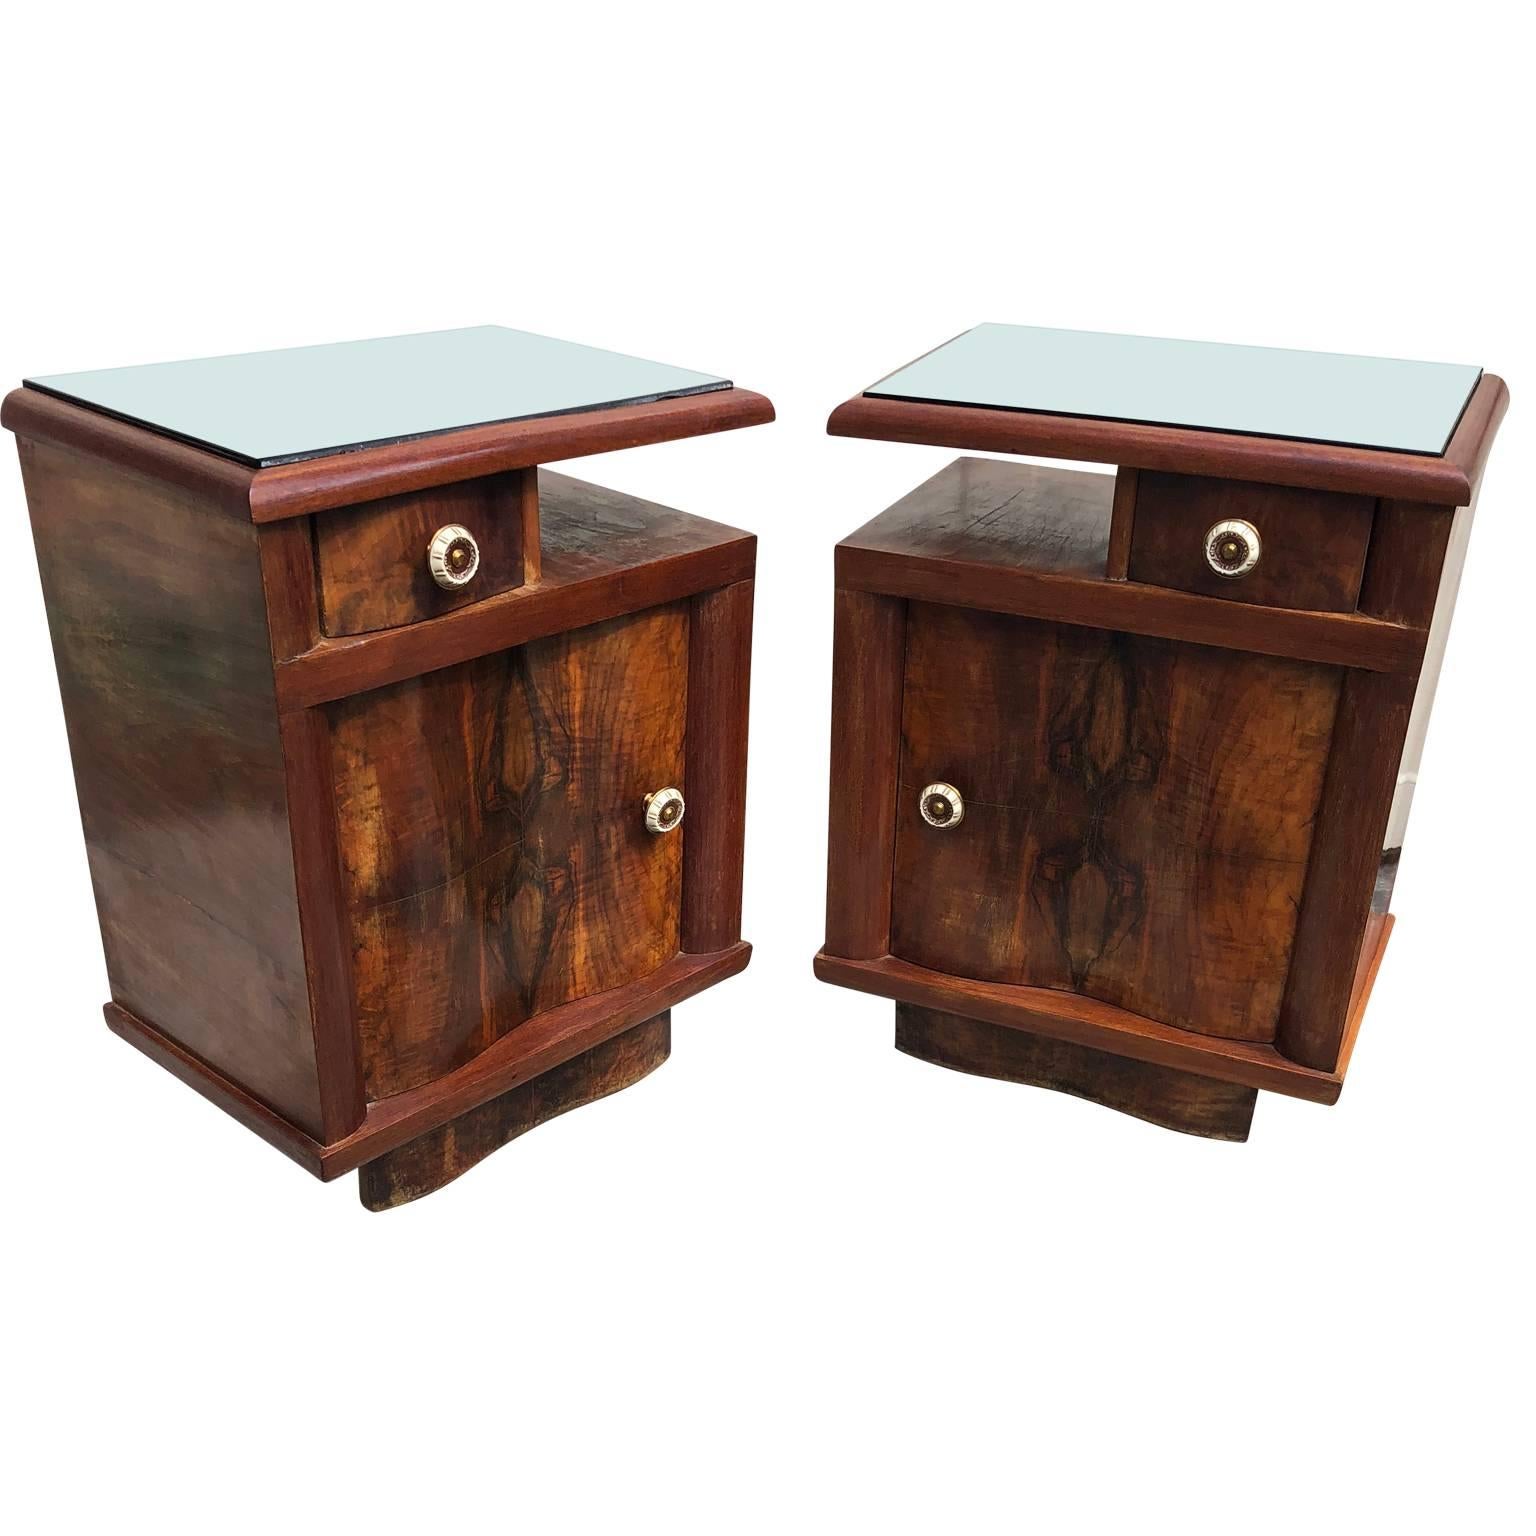 20th Century Pair Of Italian Art Deco Bed Side Tables Or End Tables For Sale